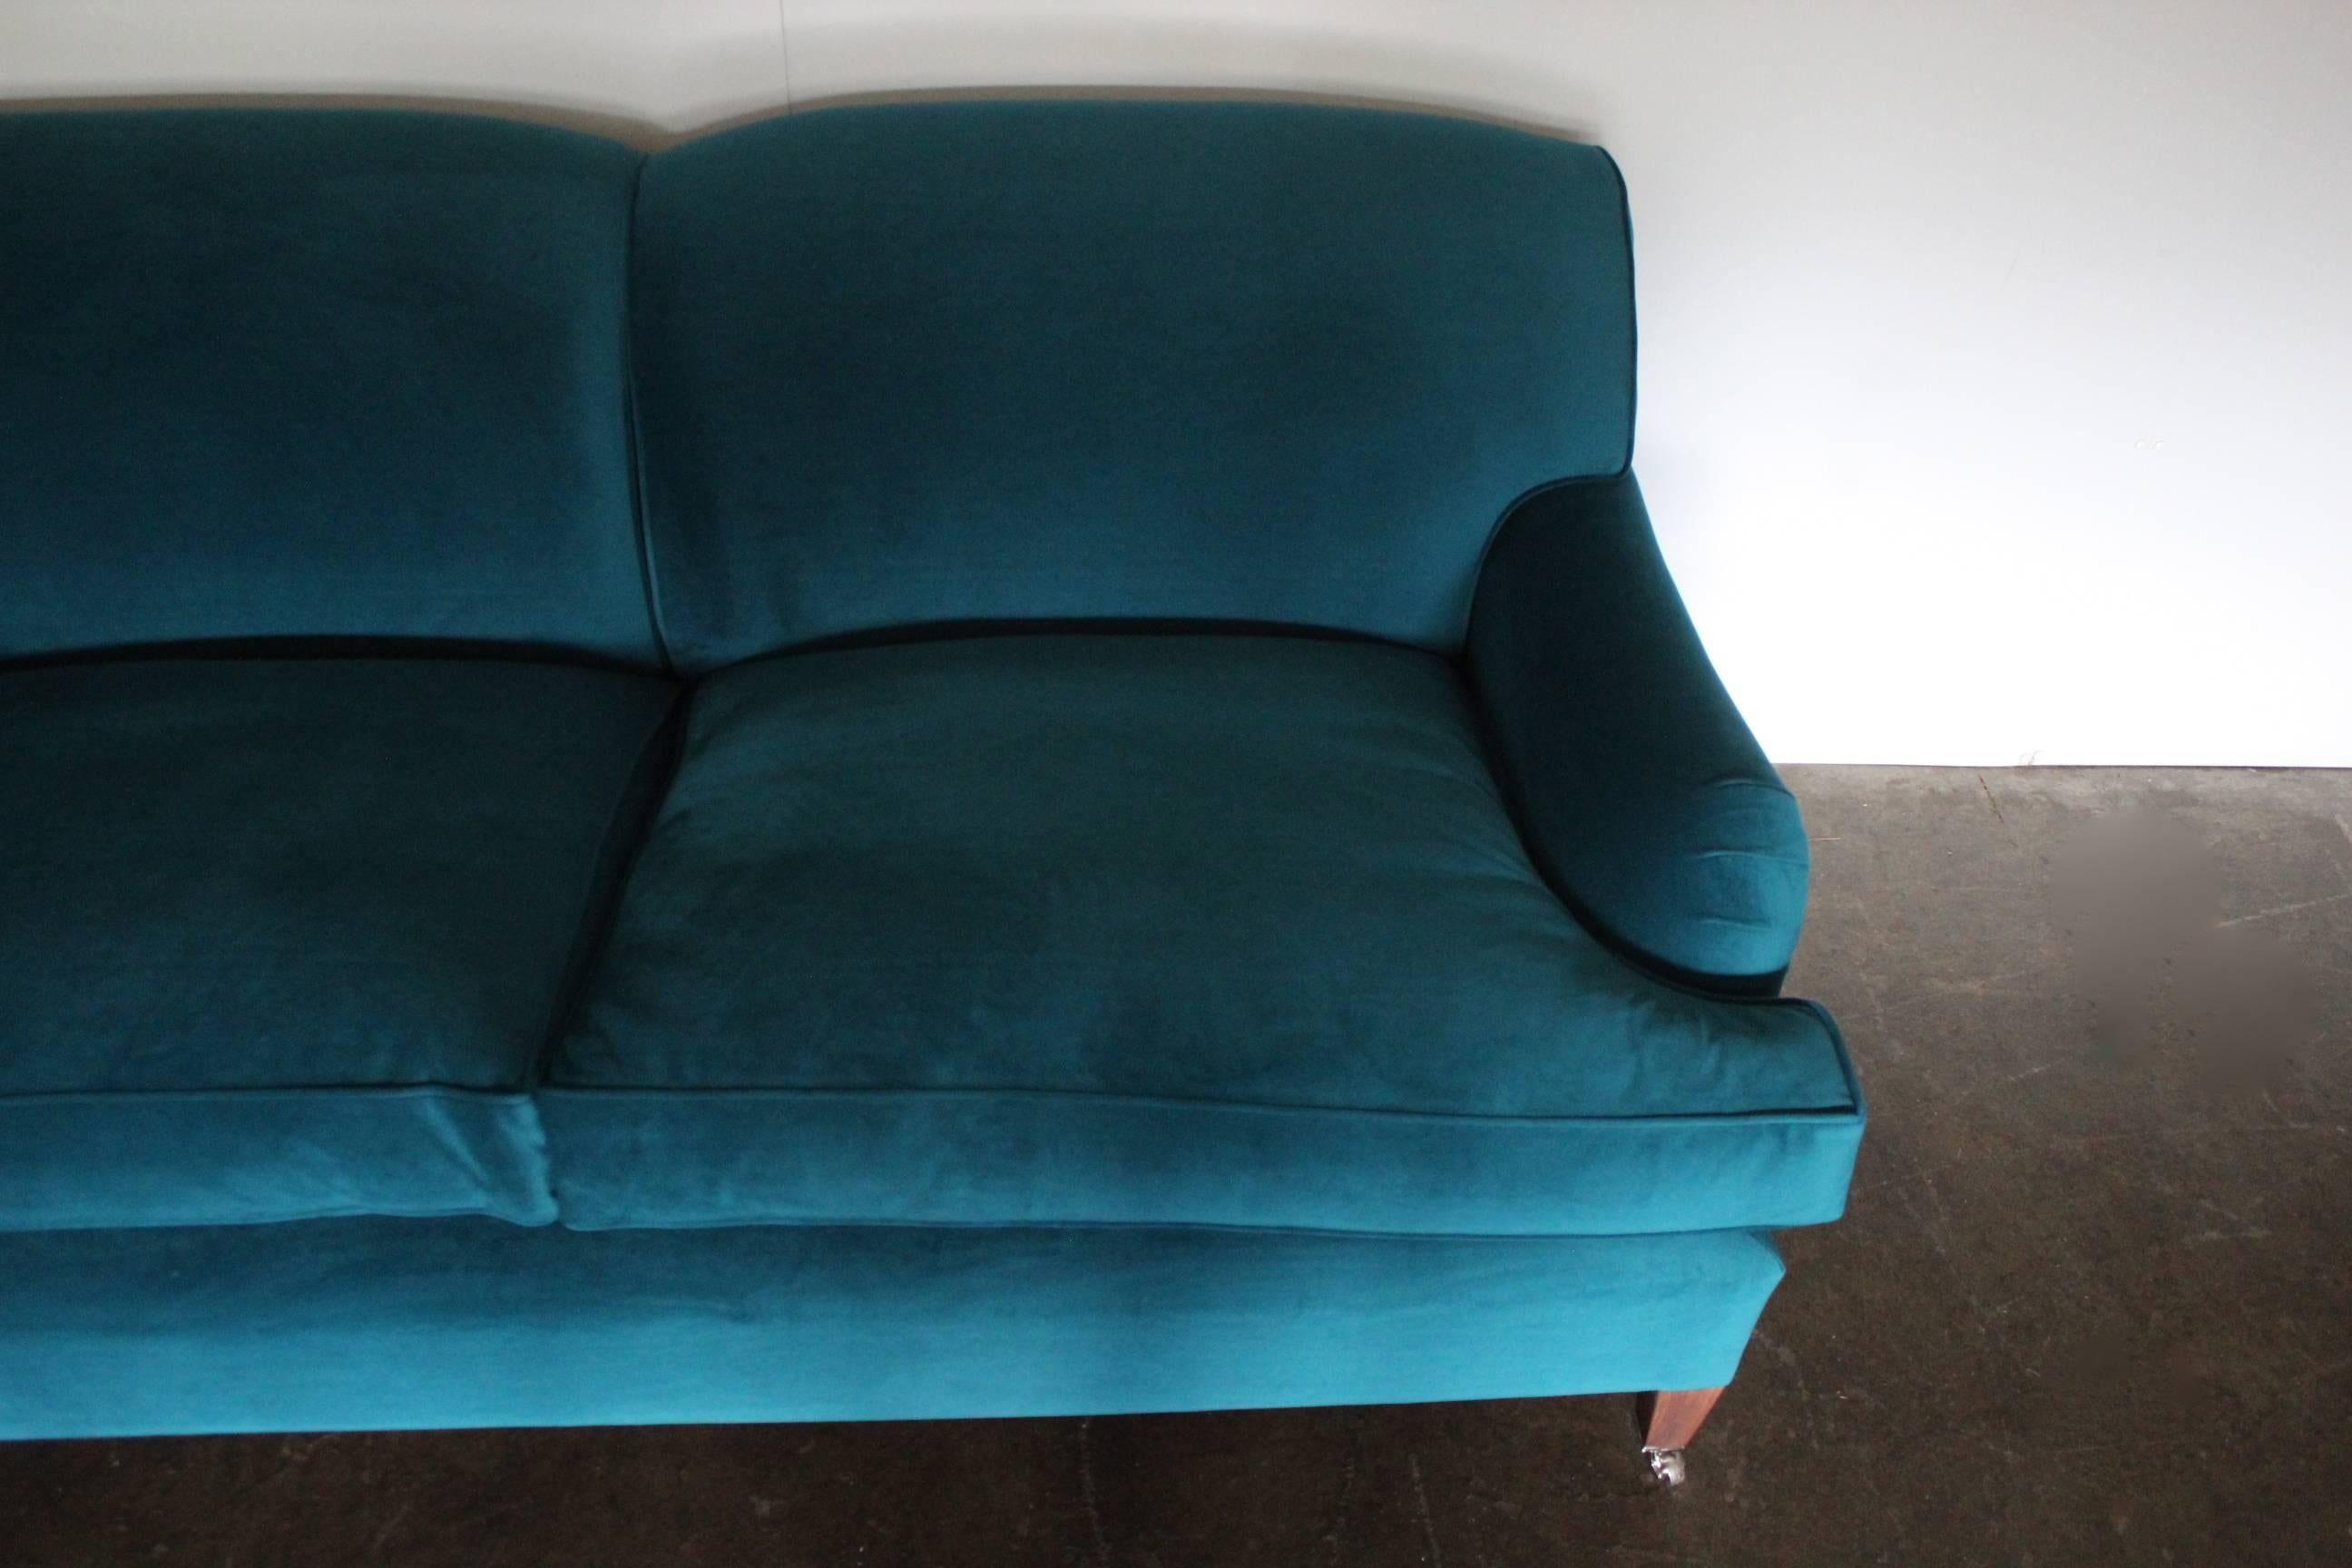 Contemporary George Smith Signature “Standard-Arm” Sofa in Teal Green Blue Velvet